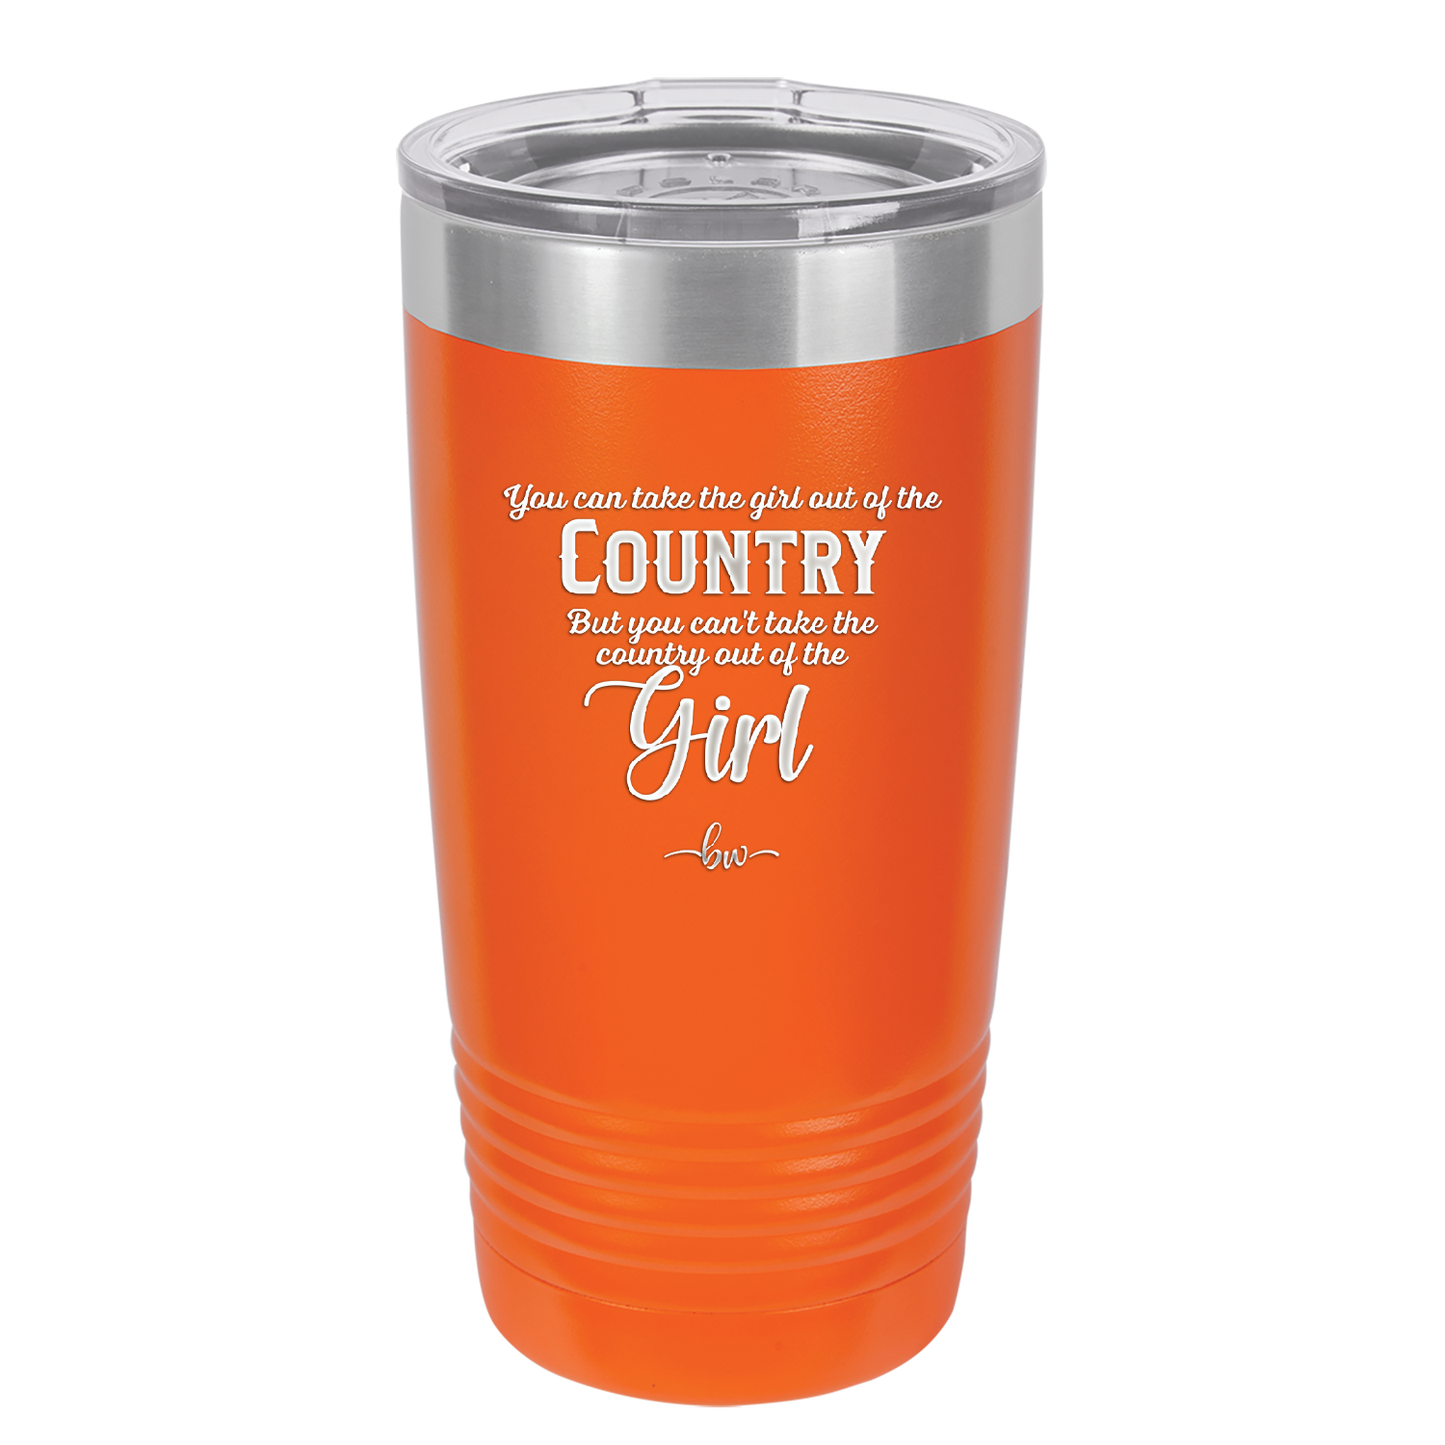 You Can Take the Girl Out of the Country But You Can't Take the Country Out of the Girl - Laser Engraved Stainless Steel Drinkware - 2253 -